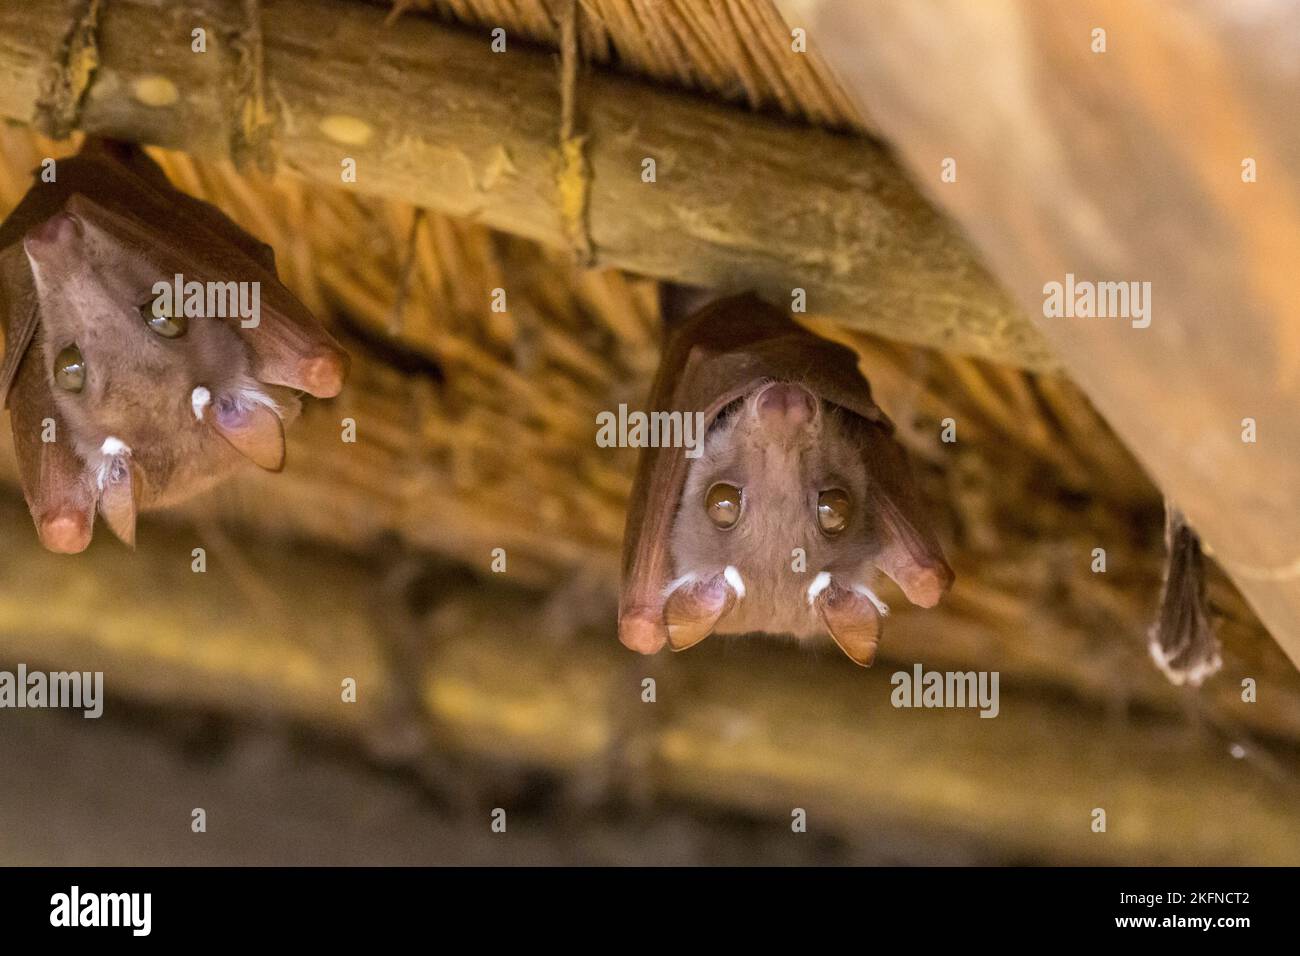 Peters's Epauletted Fruit Bat (Epomophorus crypturus) roosting under a roof in Kruger National Park, South Africa in February 2017 Stock Photo